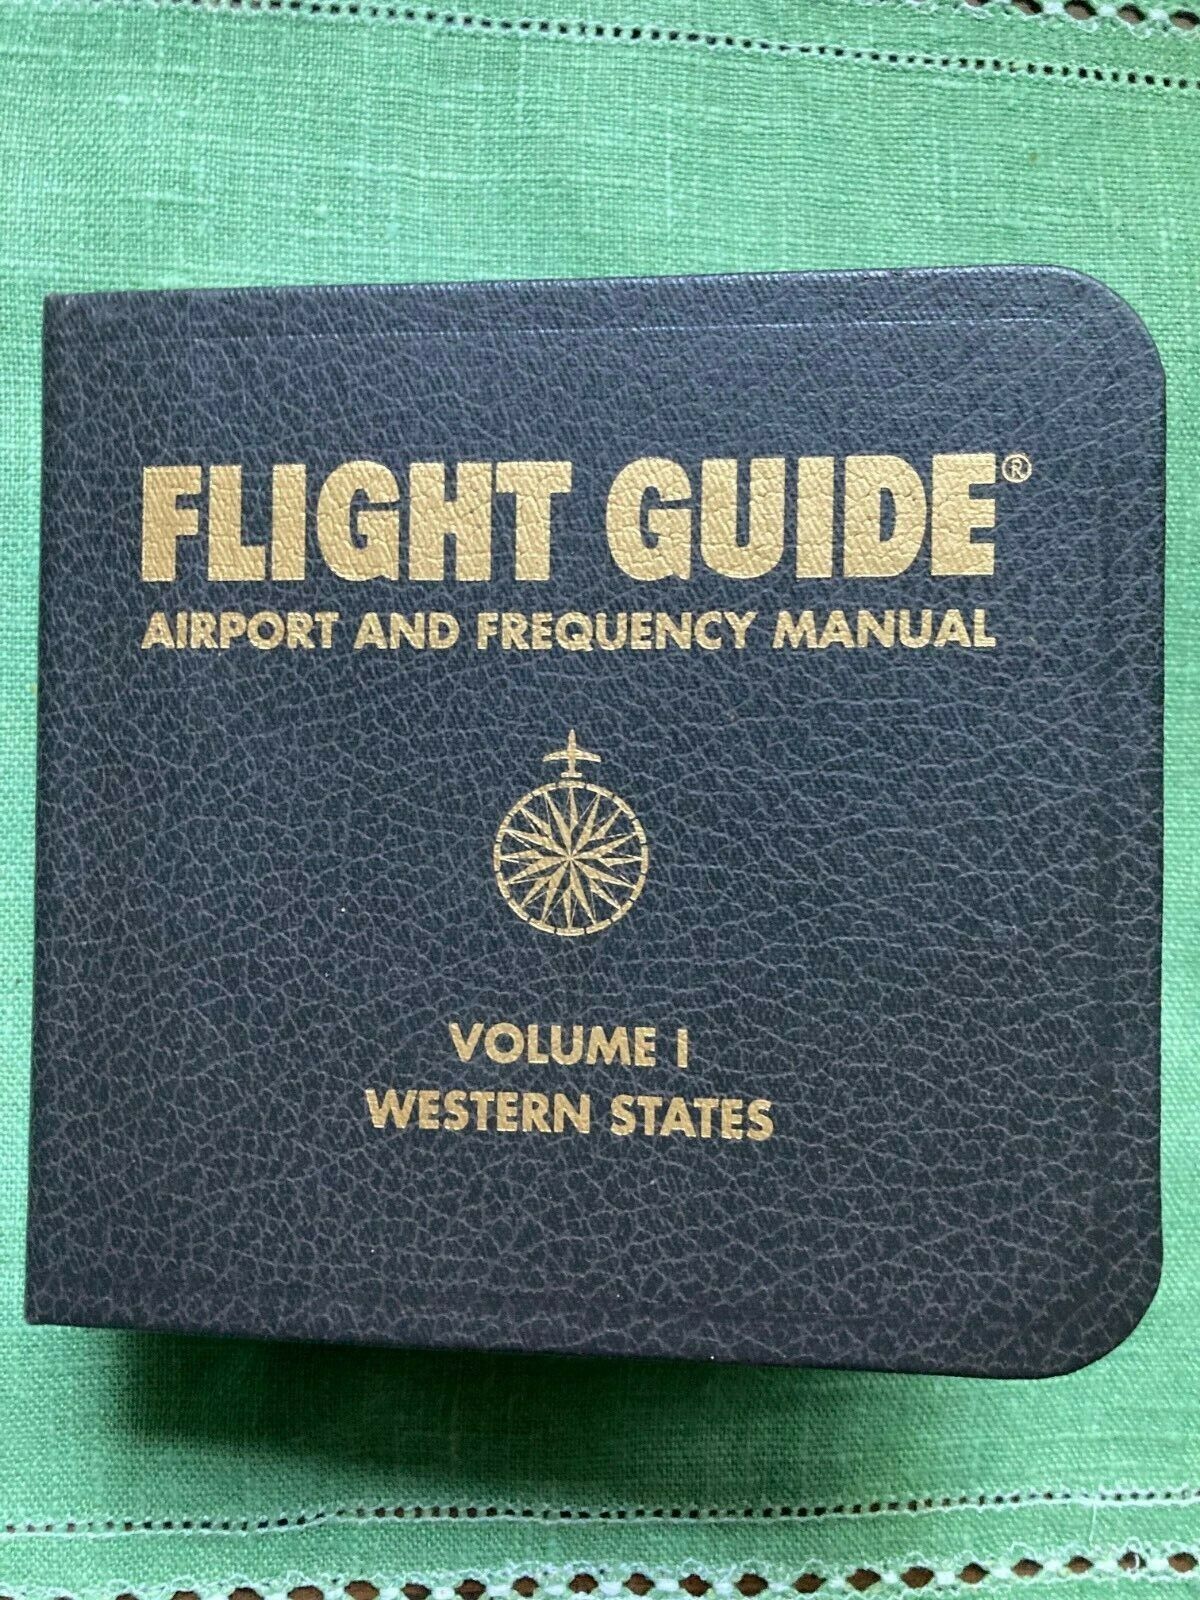 FINE 2004-06 Flight Guide Airport & Frequency Manual Vol.1 Western States 